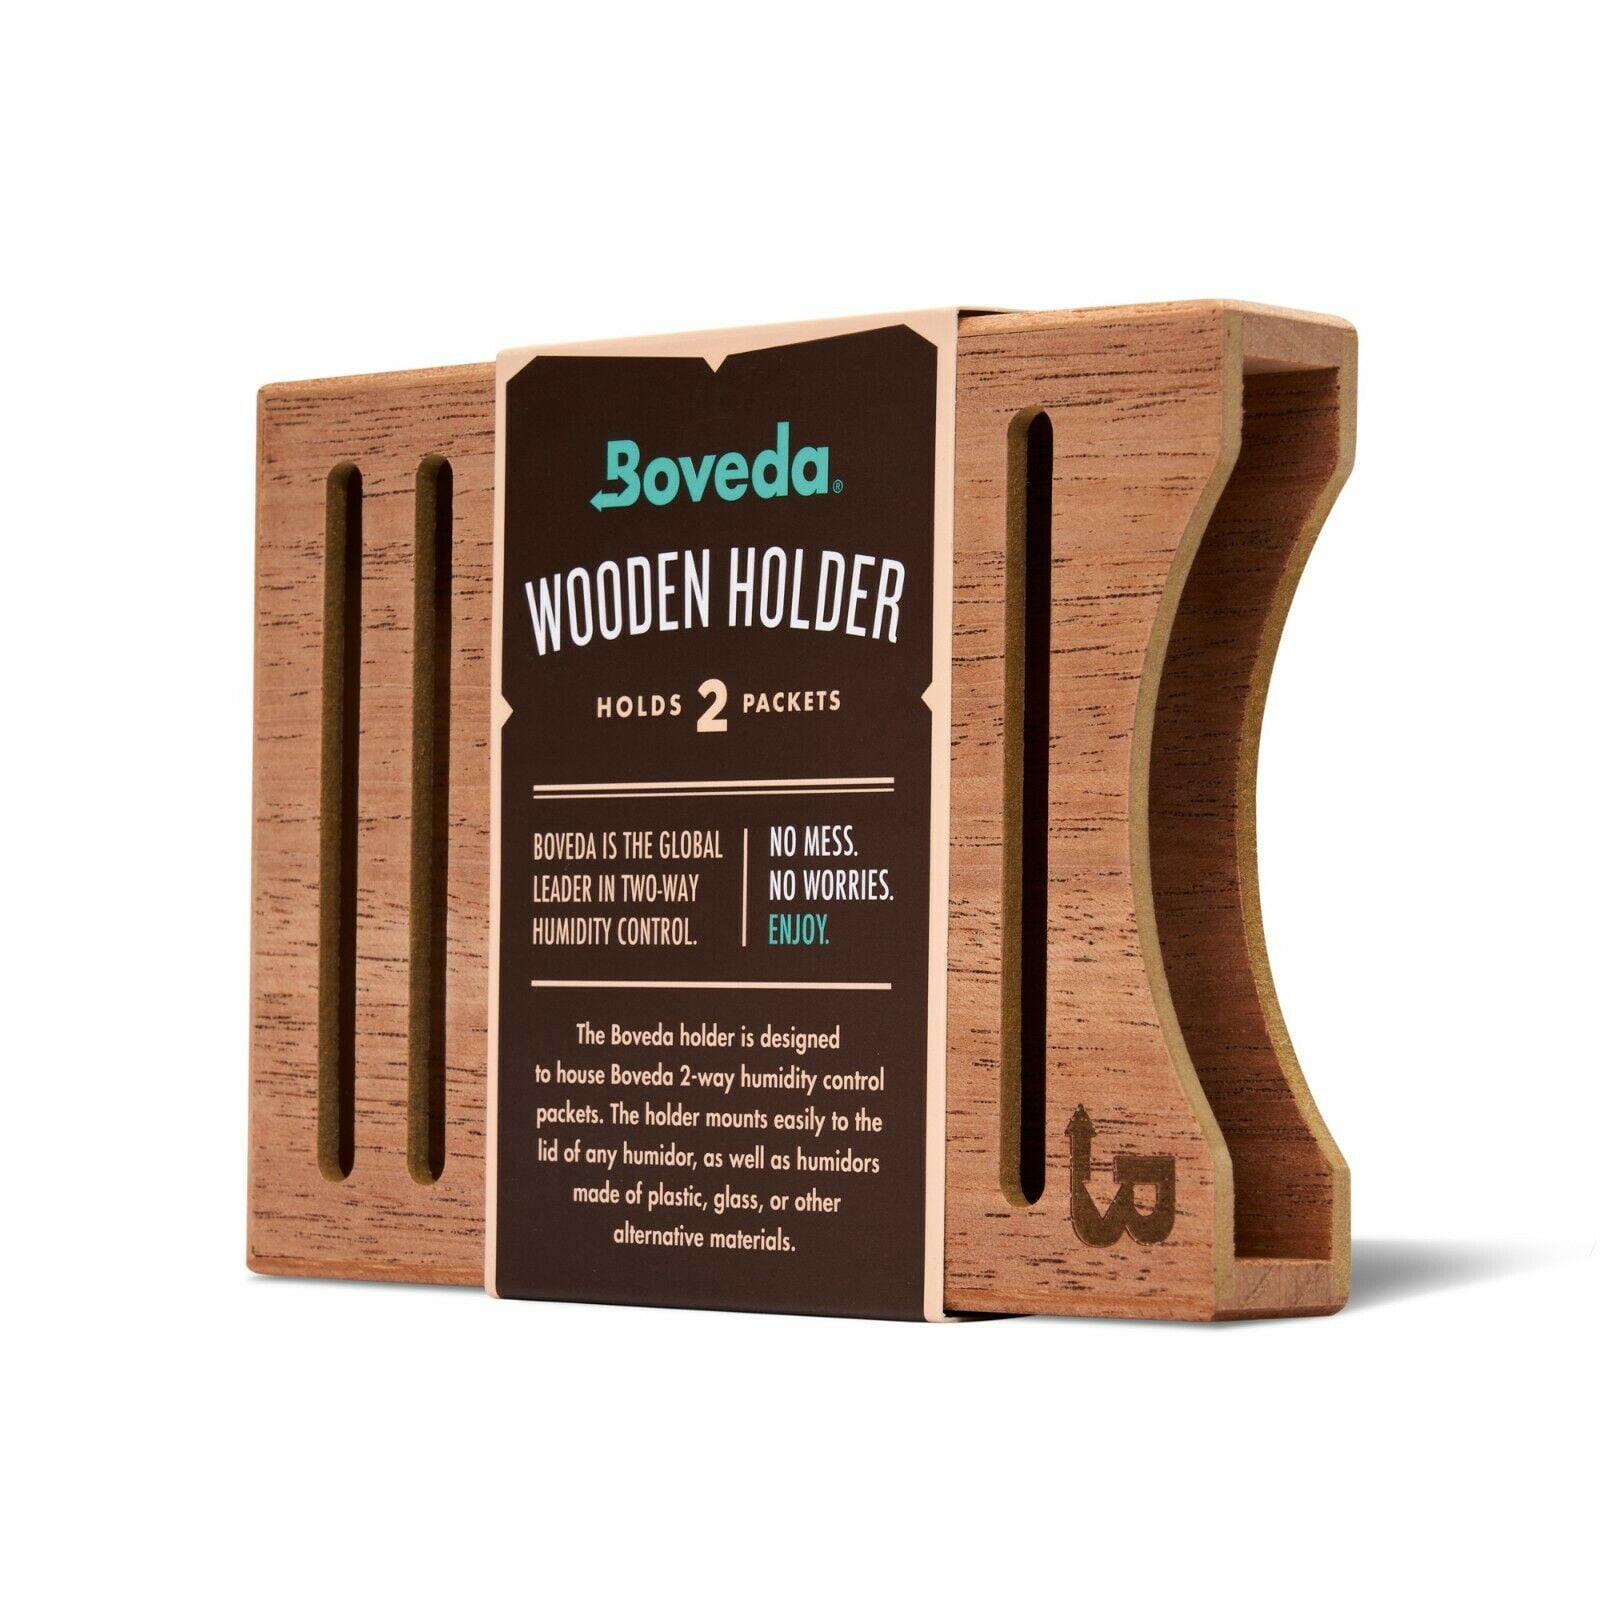 Boveda Cedar Wooden Holder for Mounts Easily to Any Humidity Control Packs 2 